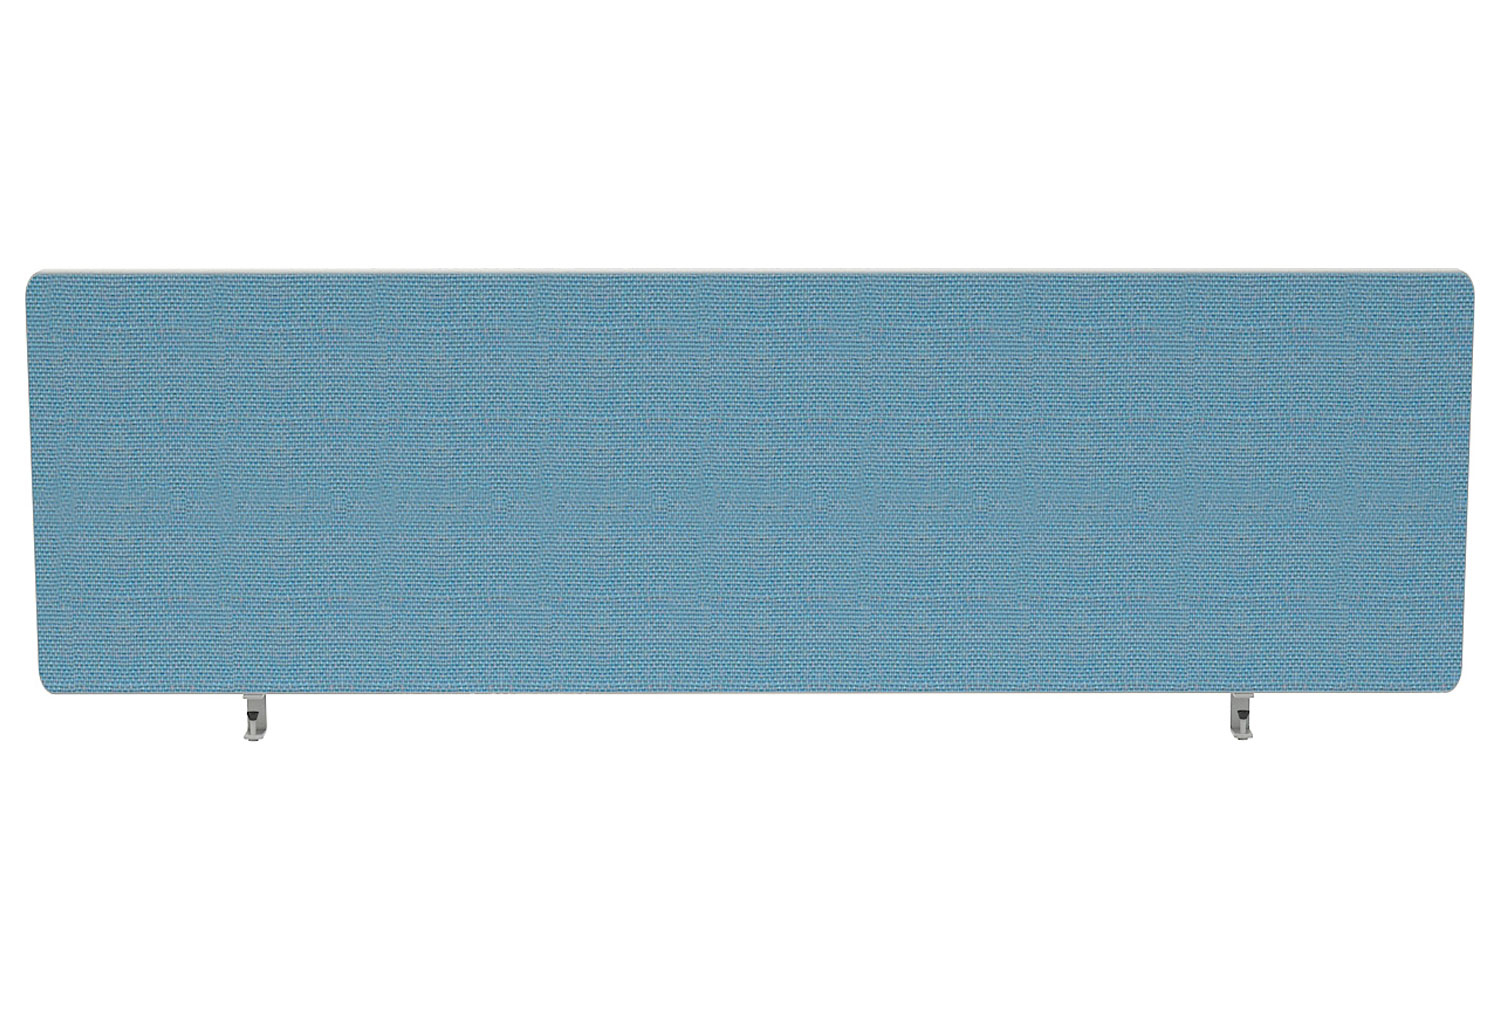 Griffin Rectangular Desktop Office Screens With Rounded Corners, 160wx2dx30h (cm), Sky Blue